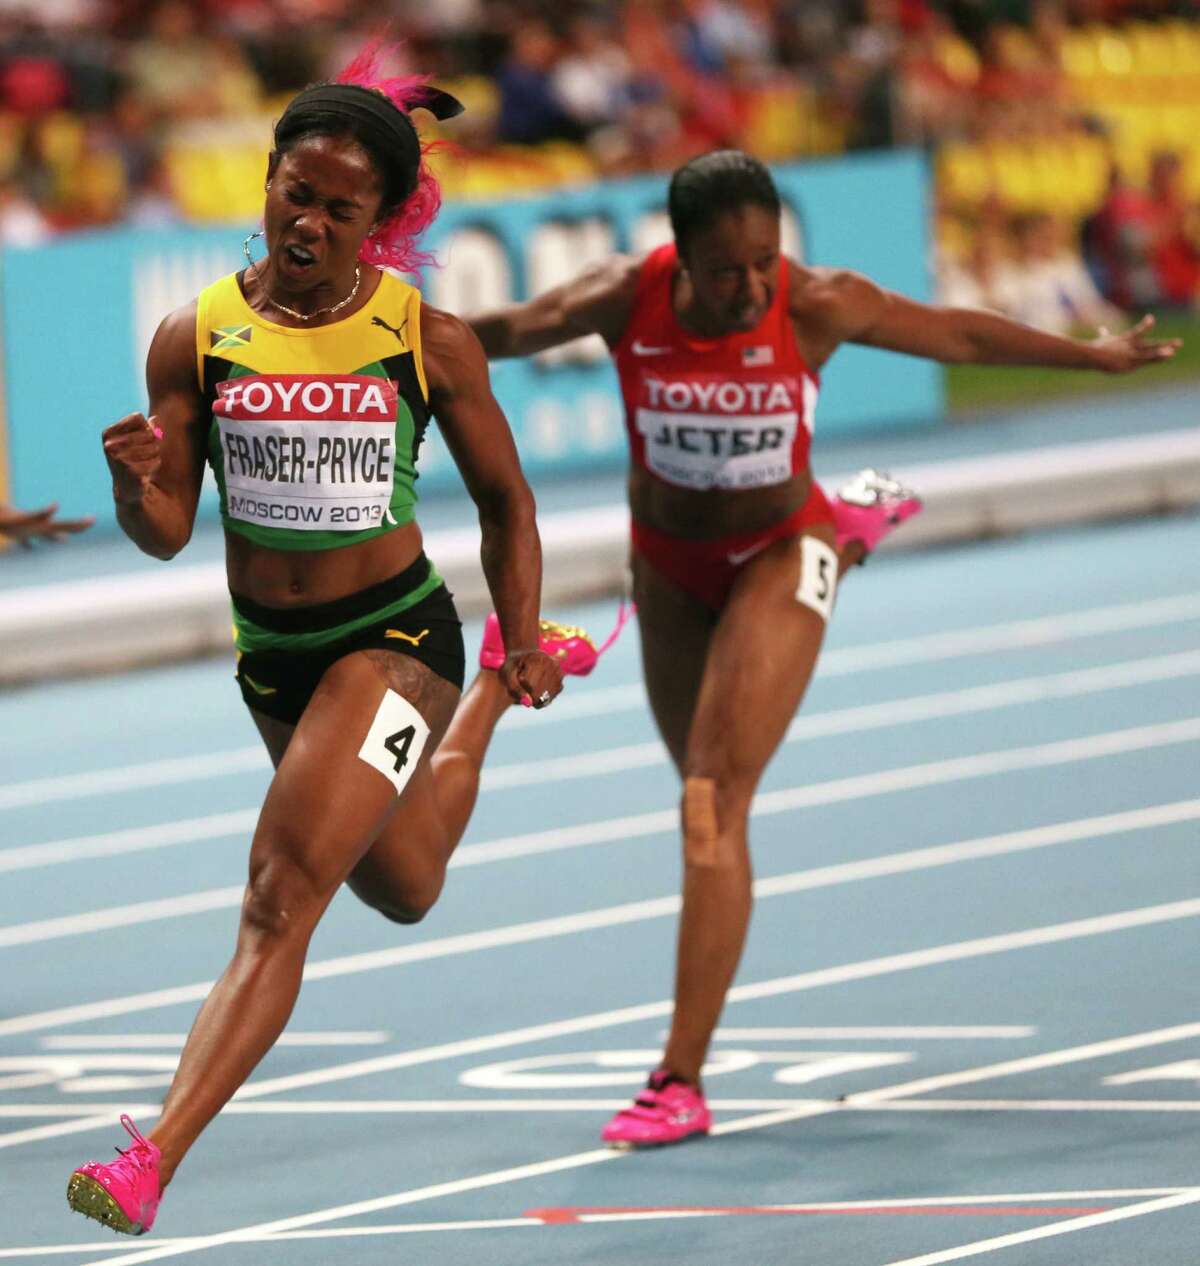 Jamaica's Shelly-Ann Fraser-Pryce wins the women's 100-meter final in a time of 10.71 seconds at the 2013 world track championships in Moscow.